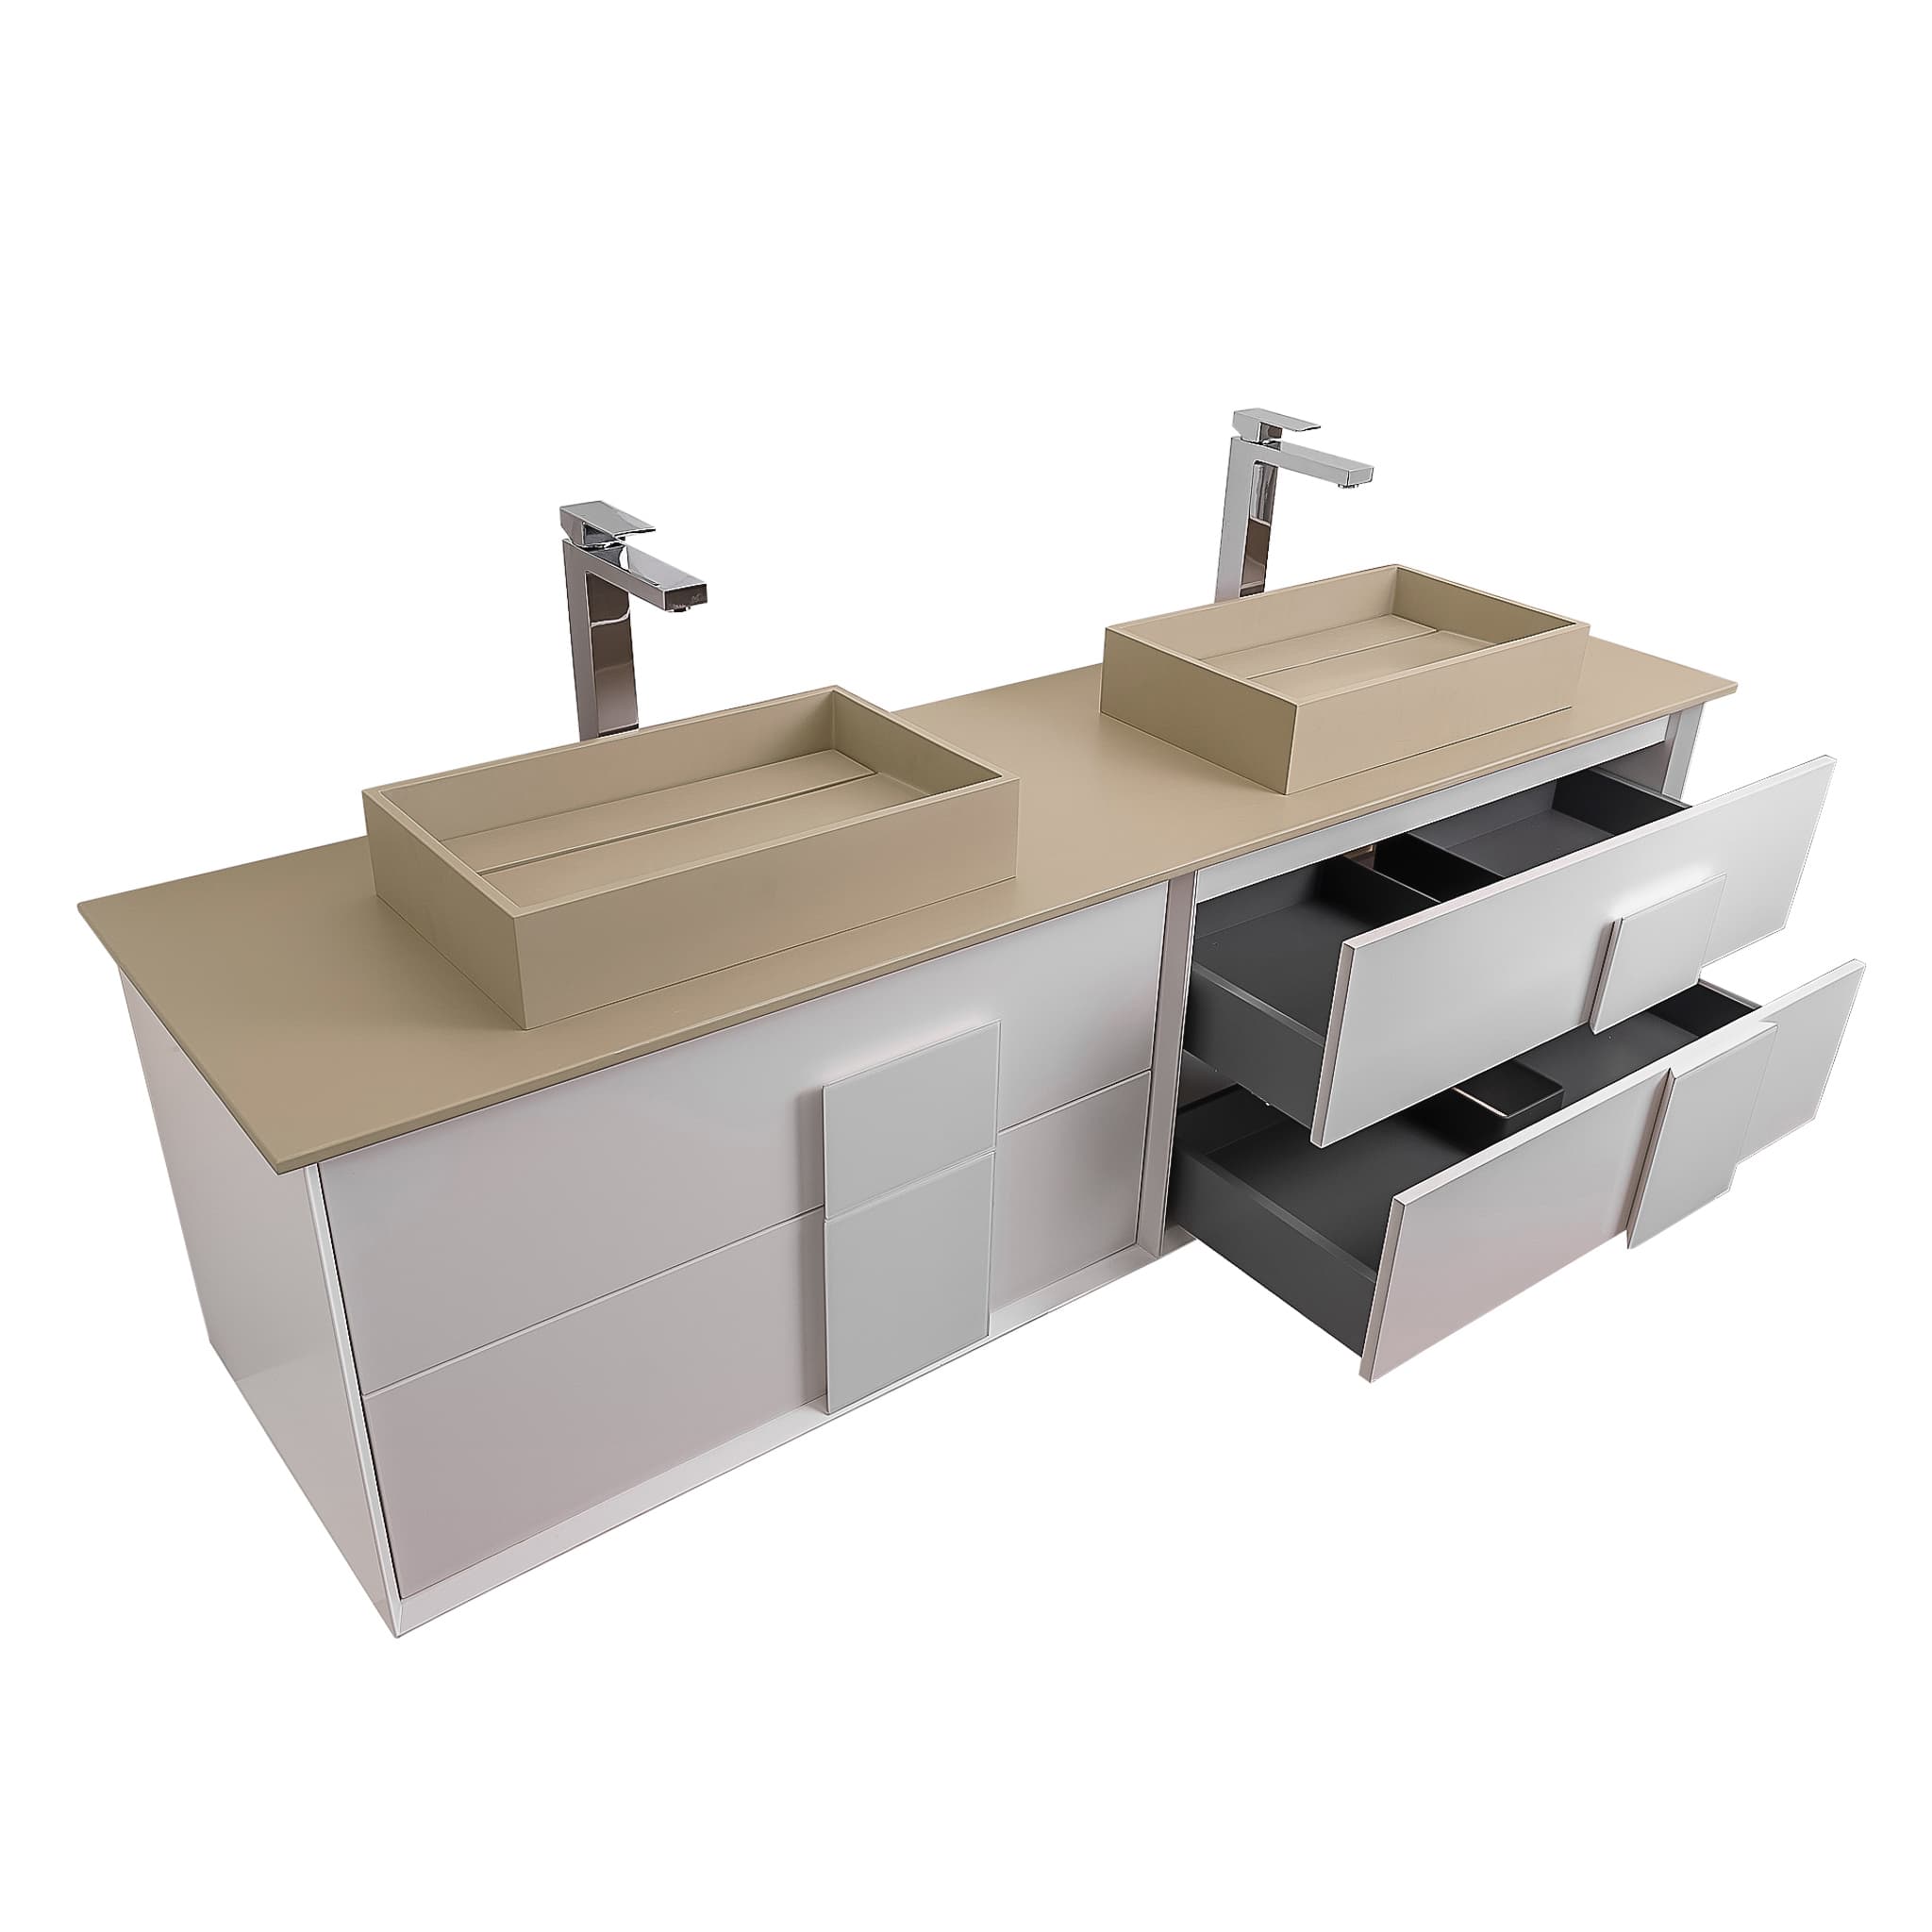 Piazza 63 Matte White With White Handle Cabinet, Solid Surface Flat Taupe Counter and Two Infinity Square Solid Surface Taupe Basin 1329, Wall Mounted Modern Vanity Set